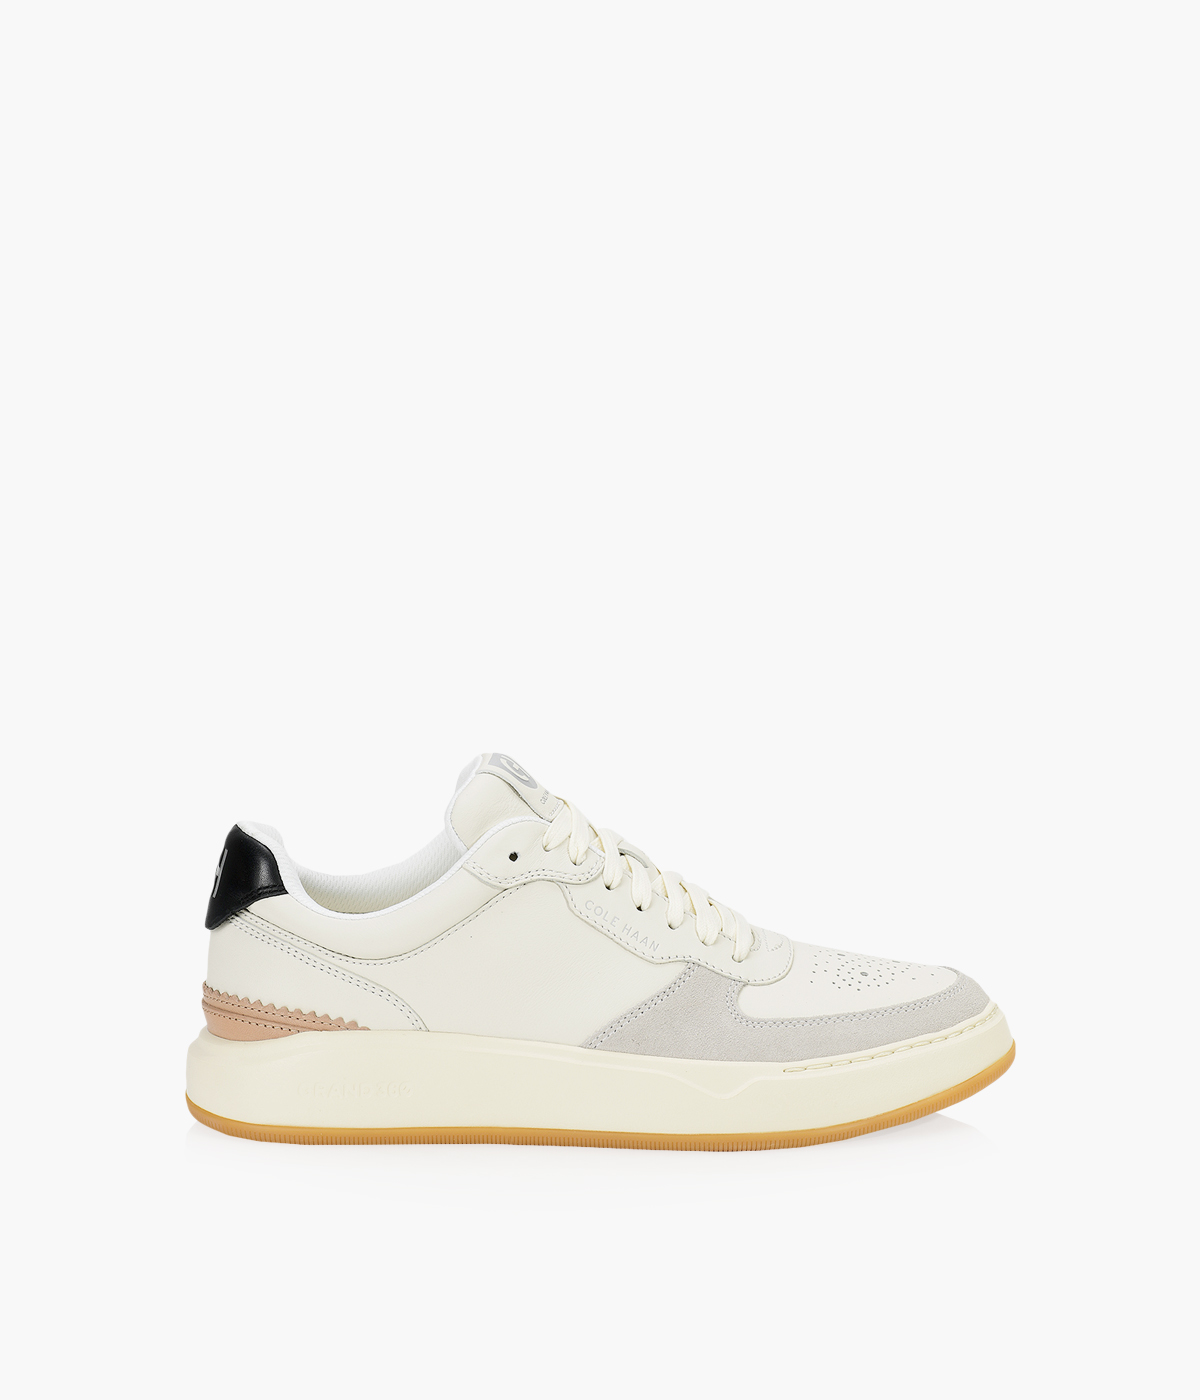 COLE HAAN GRANDPRO CROSSOVER - White Leather | Browns Shoes